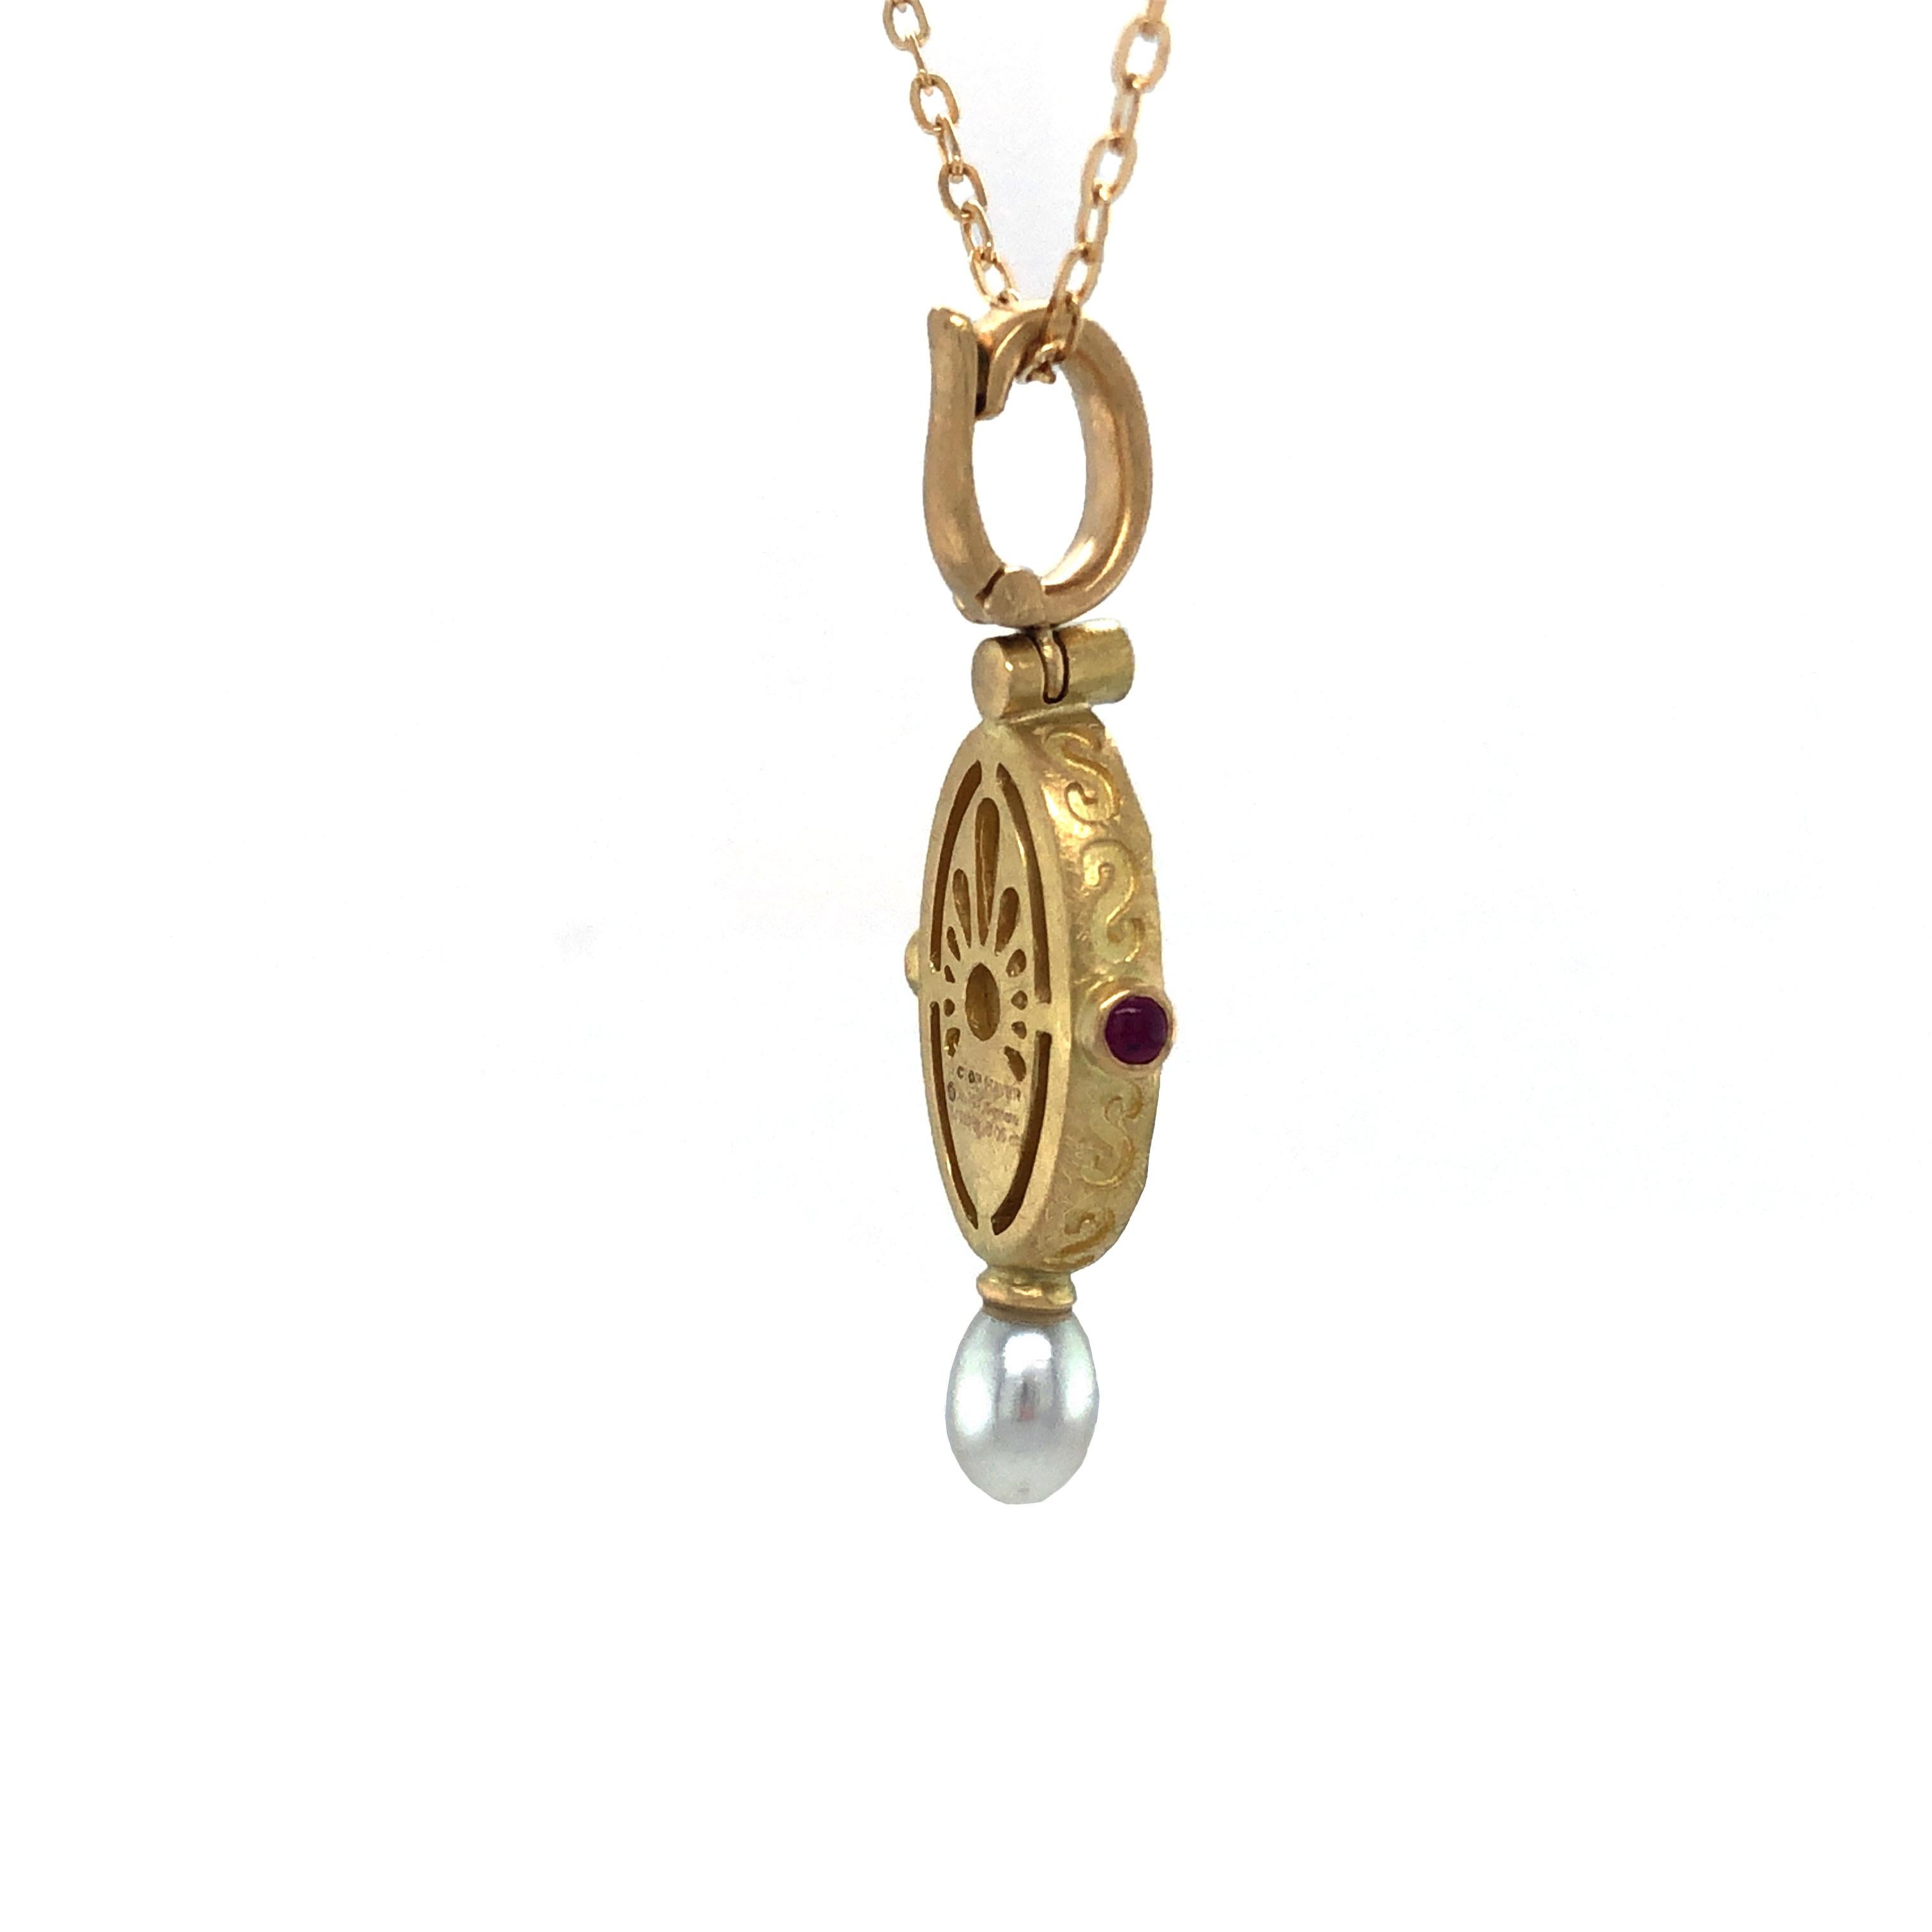 Women's Oval Pendant Necklace 18k Yellow Gold Red Enamel 2 Rubies 1 Pearl 2 Star Paillon For Sale